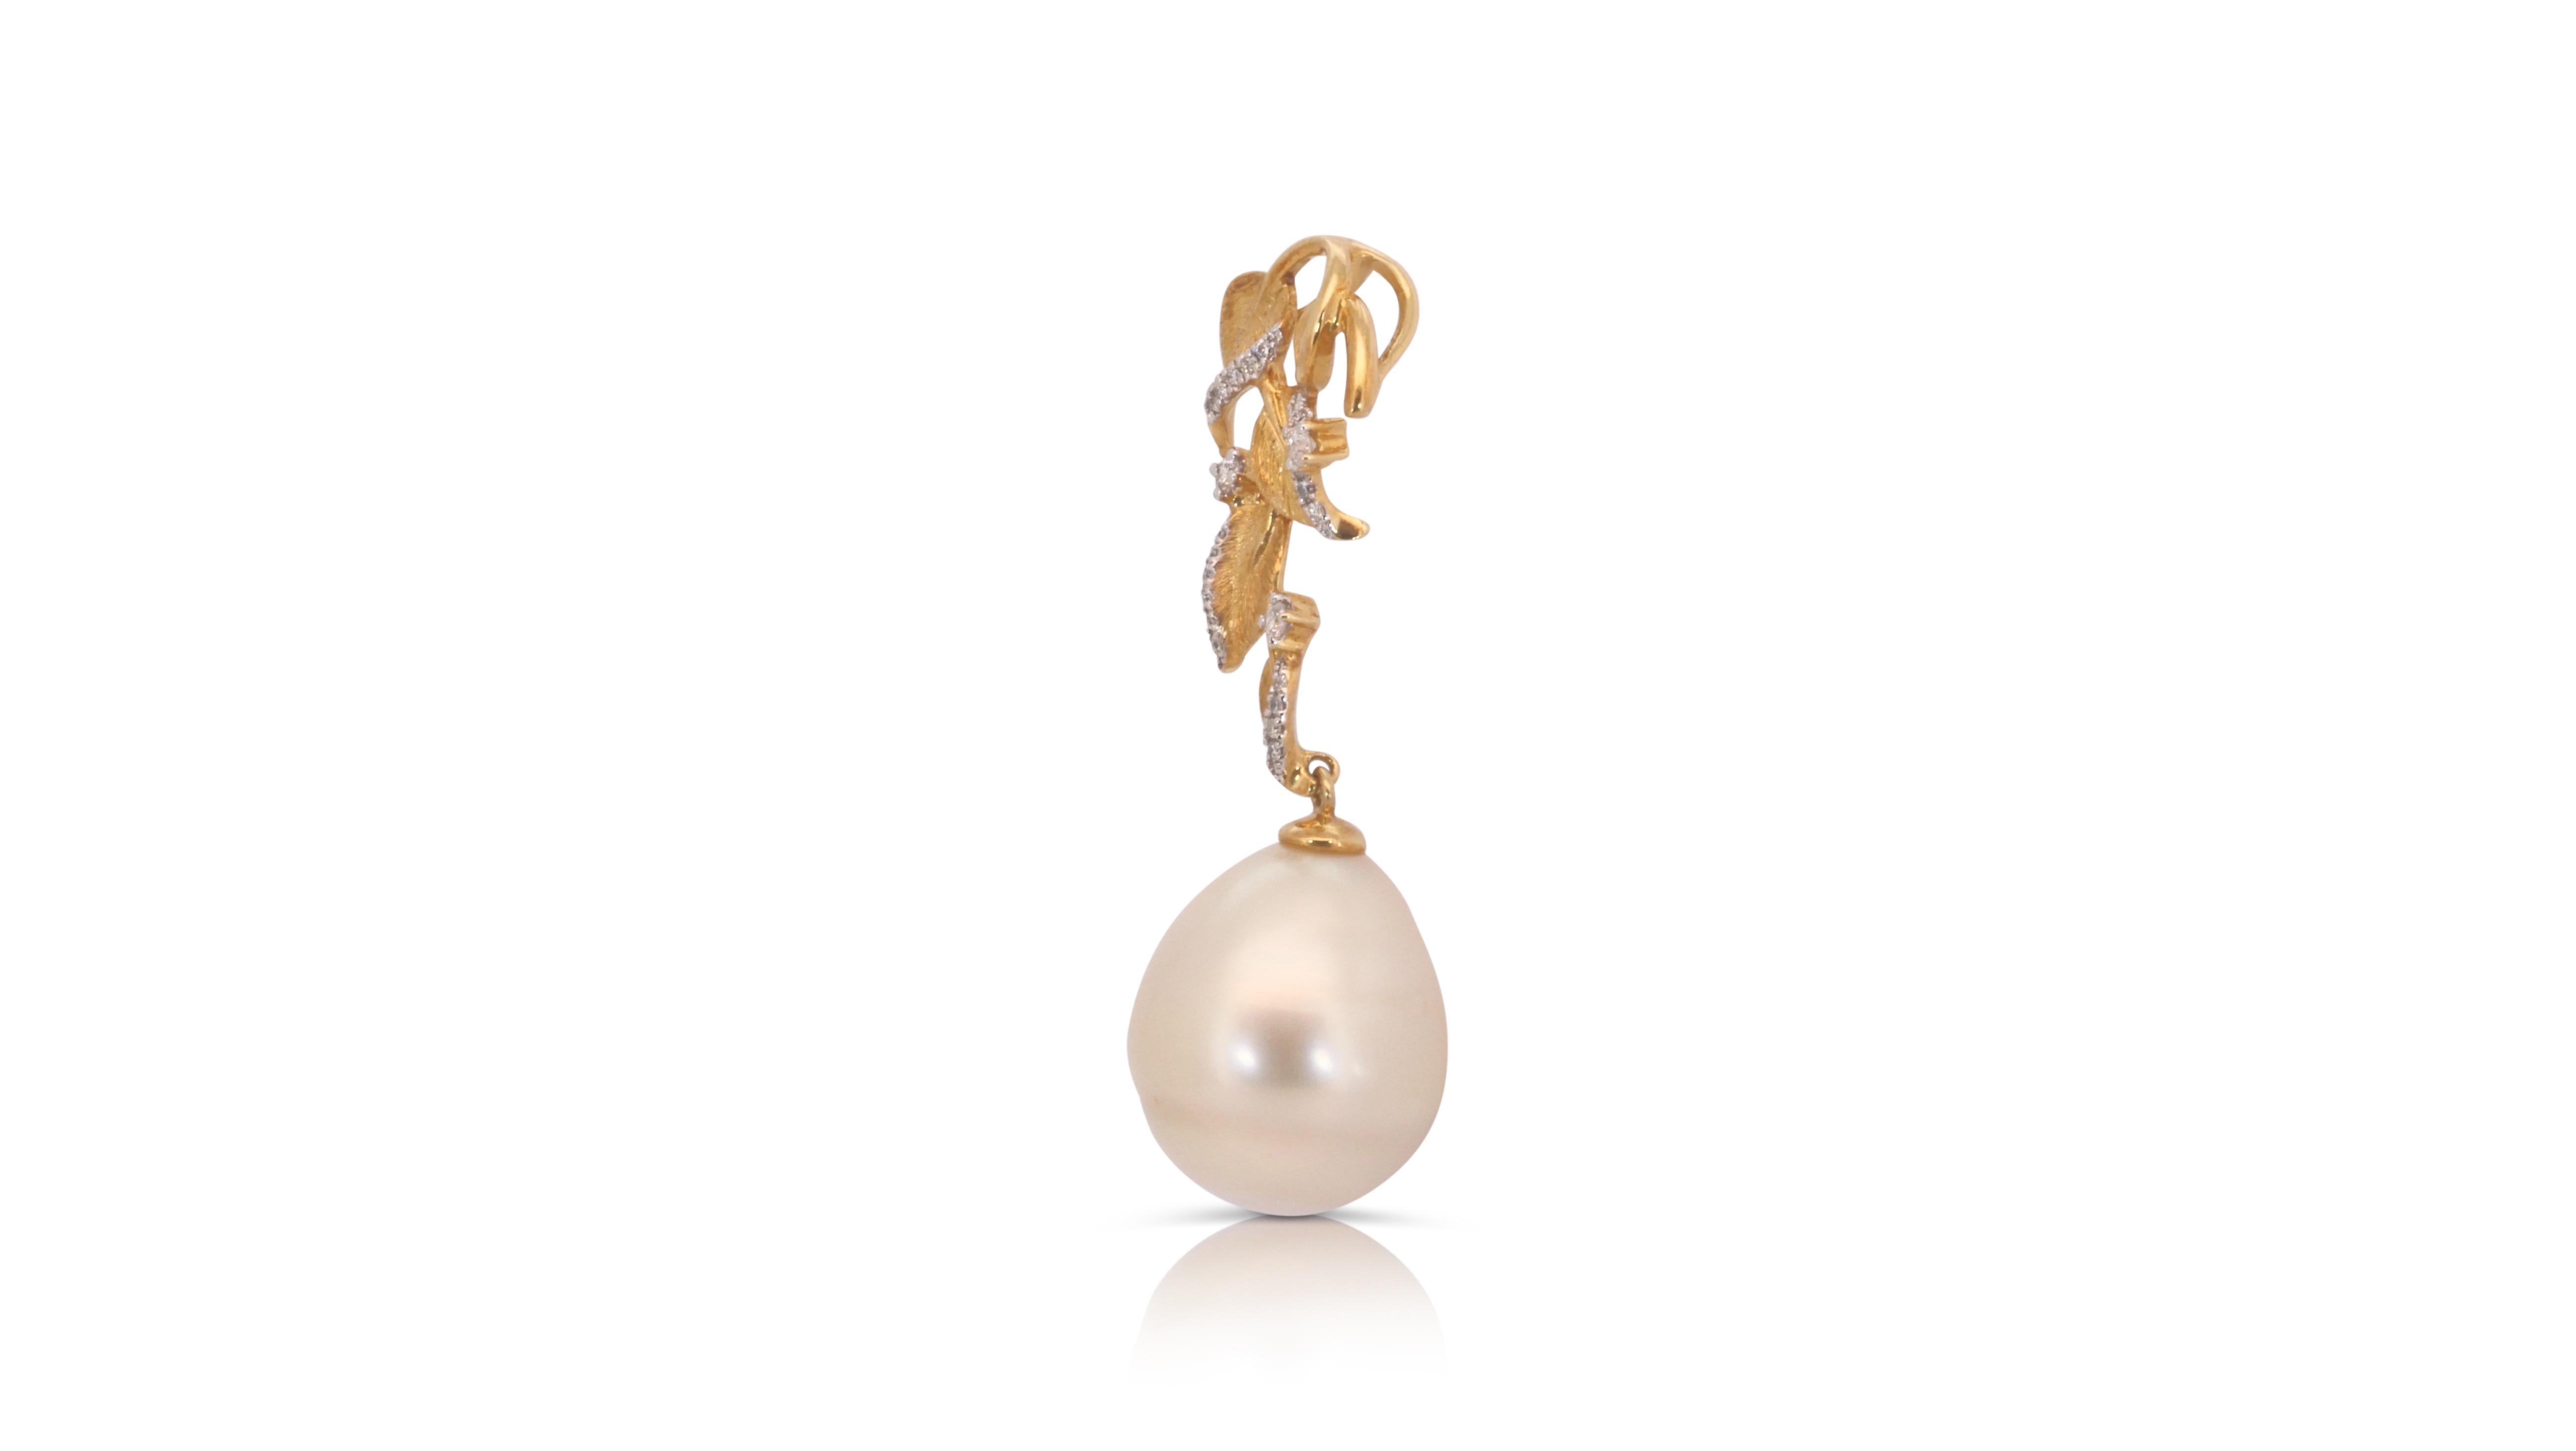 Splendid 18k Yellow Gold Pendant w/0.1 Carat Pearl & Diamonds-Chain not included For Sale 1